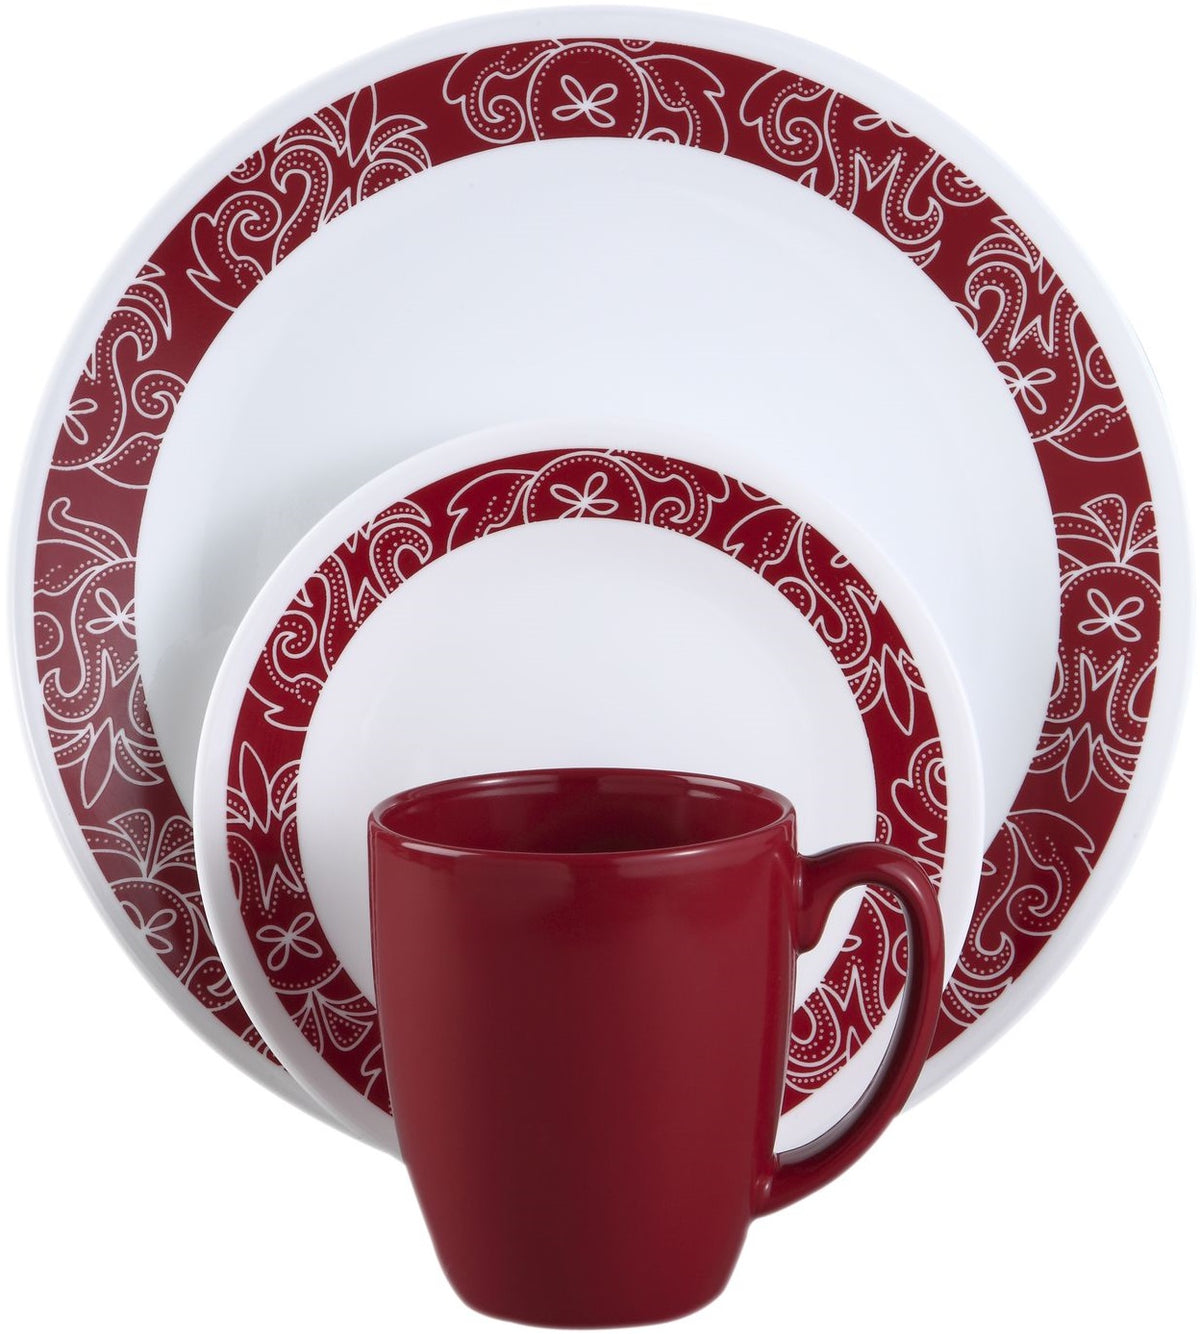 Buy corelle bandhani dinnerware set - Online store for kitchenware, dinnerware sets in USA, on sale, low price, discount deals, coupon code